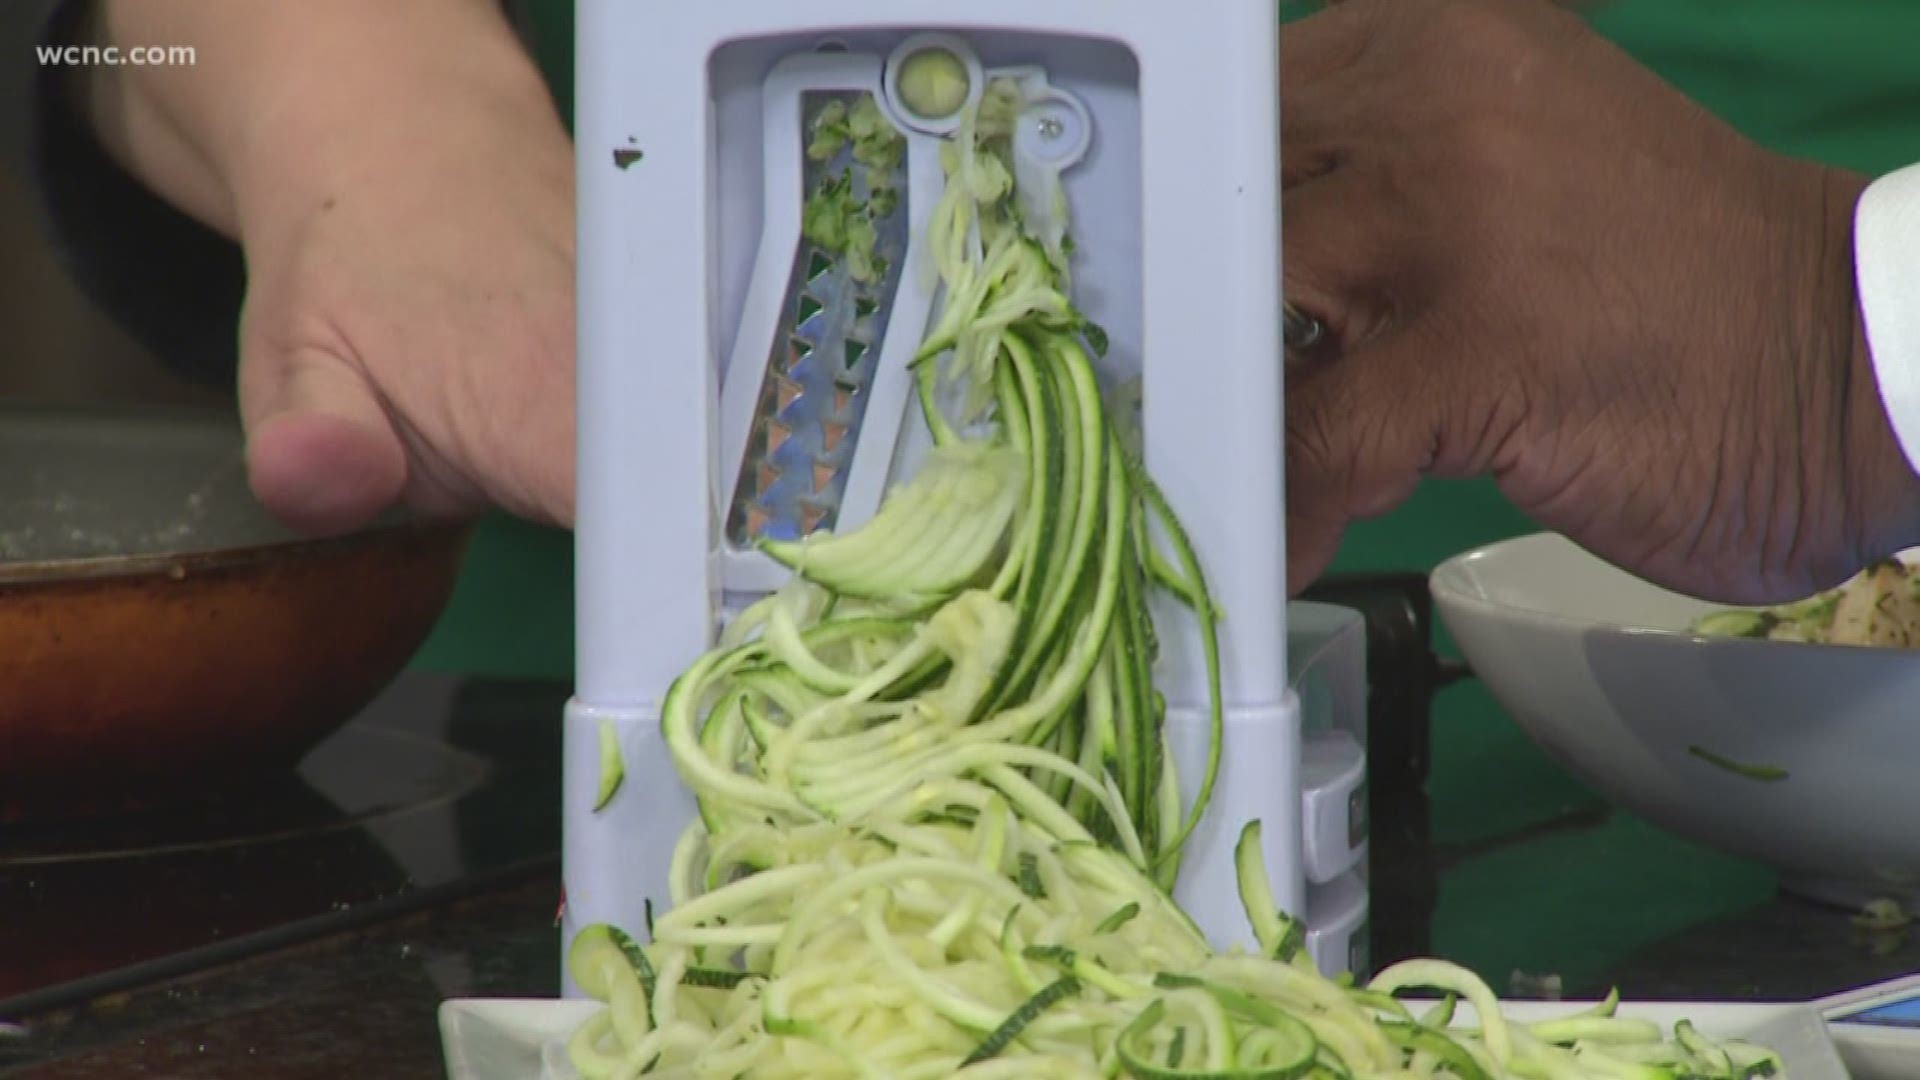 Chef Alisha Pierre shows us how to make a healthy, flavorful and easy-to-make meal with zucchini noodles.